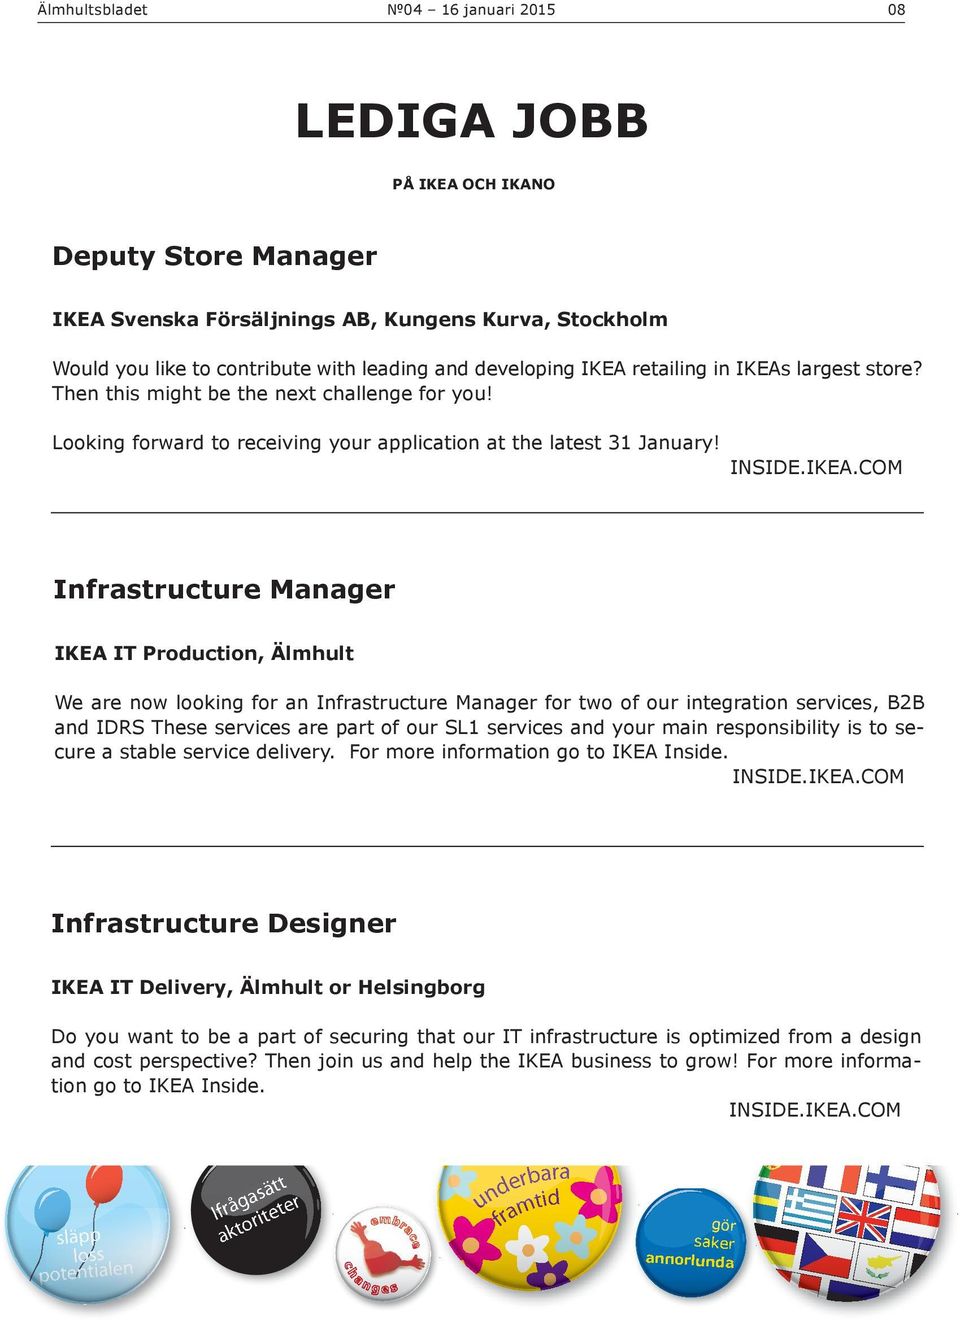 largest store? Then this might be the next challenge for you! Looking forward to receiving your application at the latest 31 January! INSIDE.IKEA.